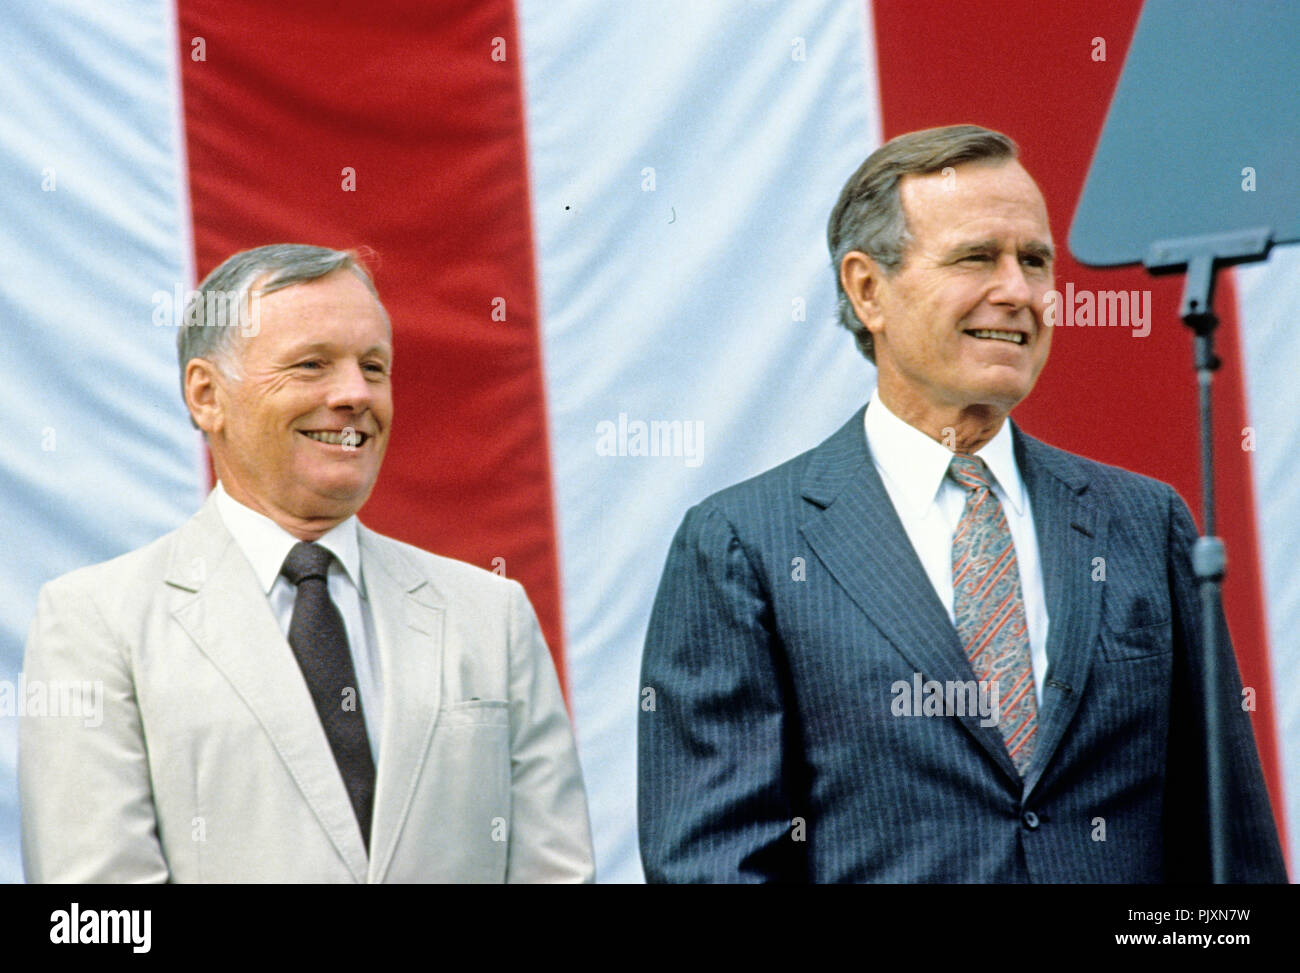 United States President George H.W. Bush, right, and Apollo 11 Commander Neil Armstrong, left, appear at an event at the National Air and Space Museum in Washington, D.C. to commemorate the 20th anniversary of the first manned landing on the Moon on July 20, 1989. Credit: Robert Trippett / Pool via CNP /MediaPunch Stock Photo